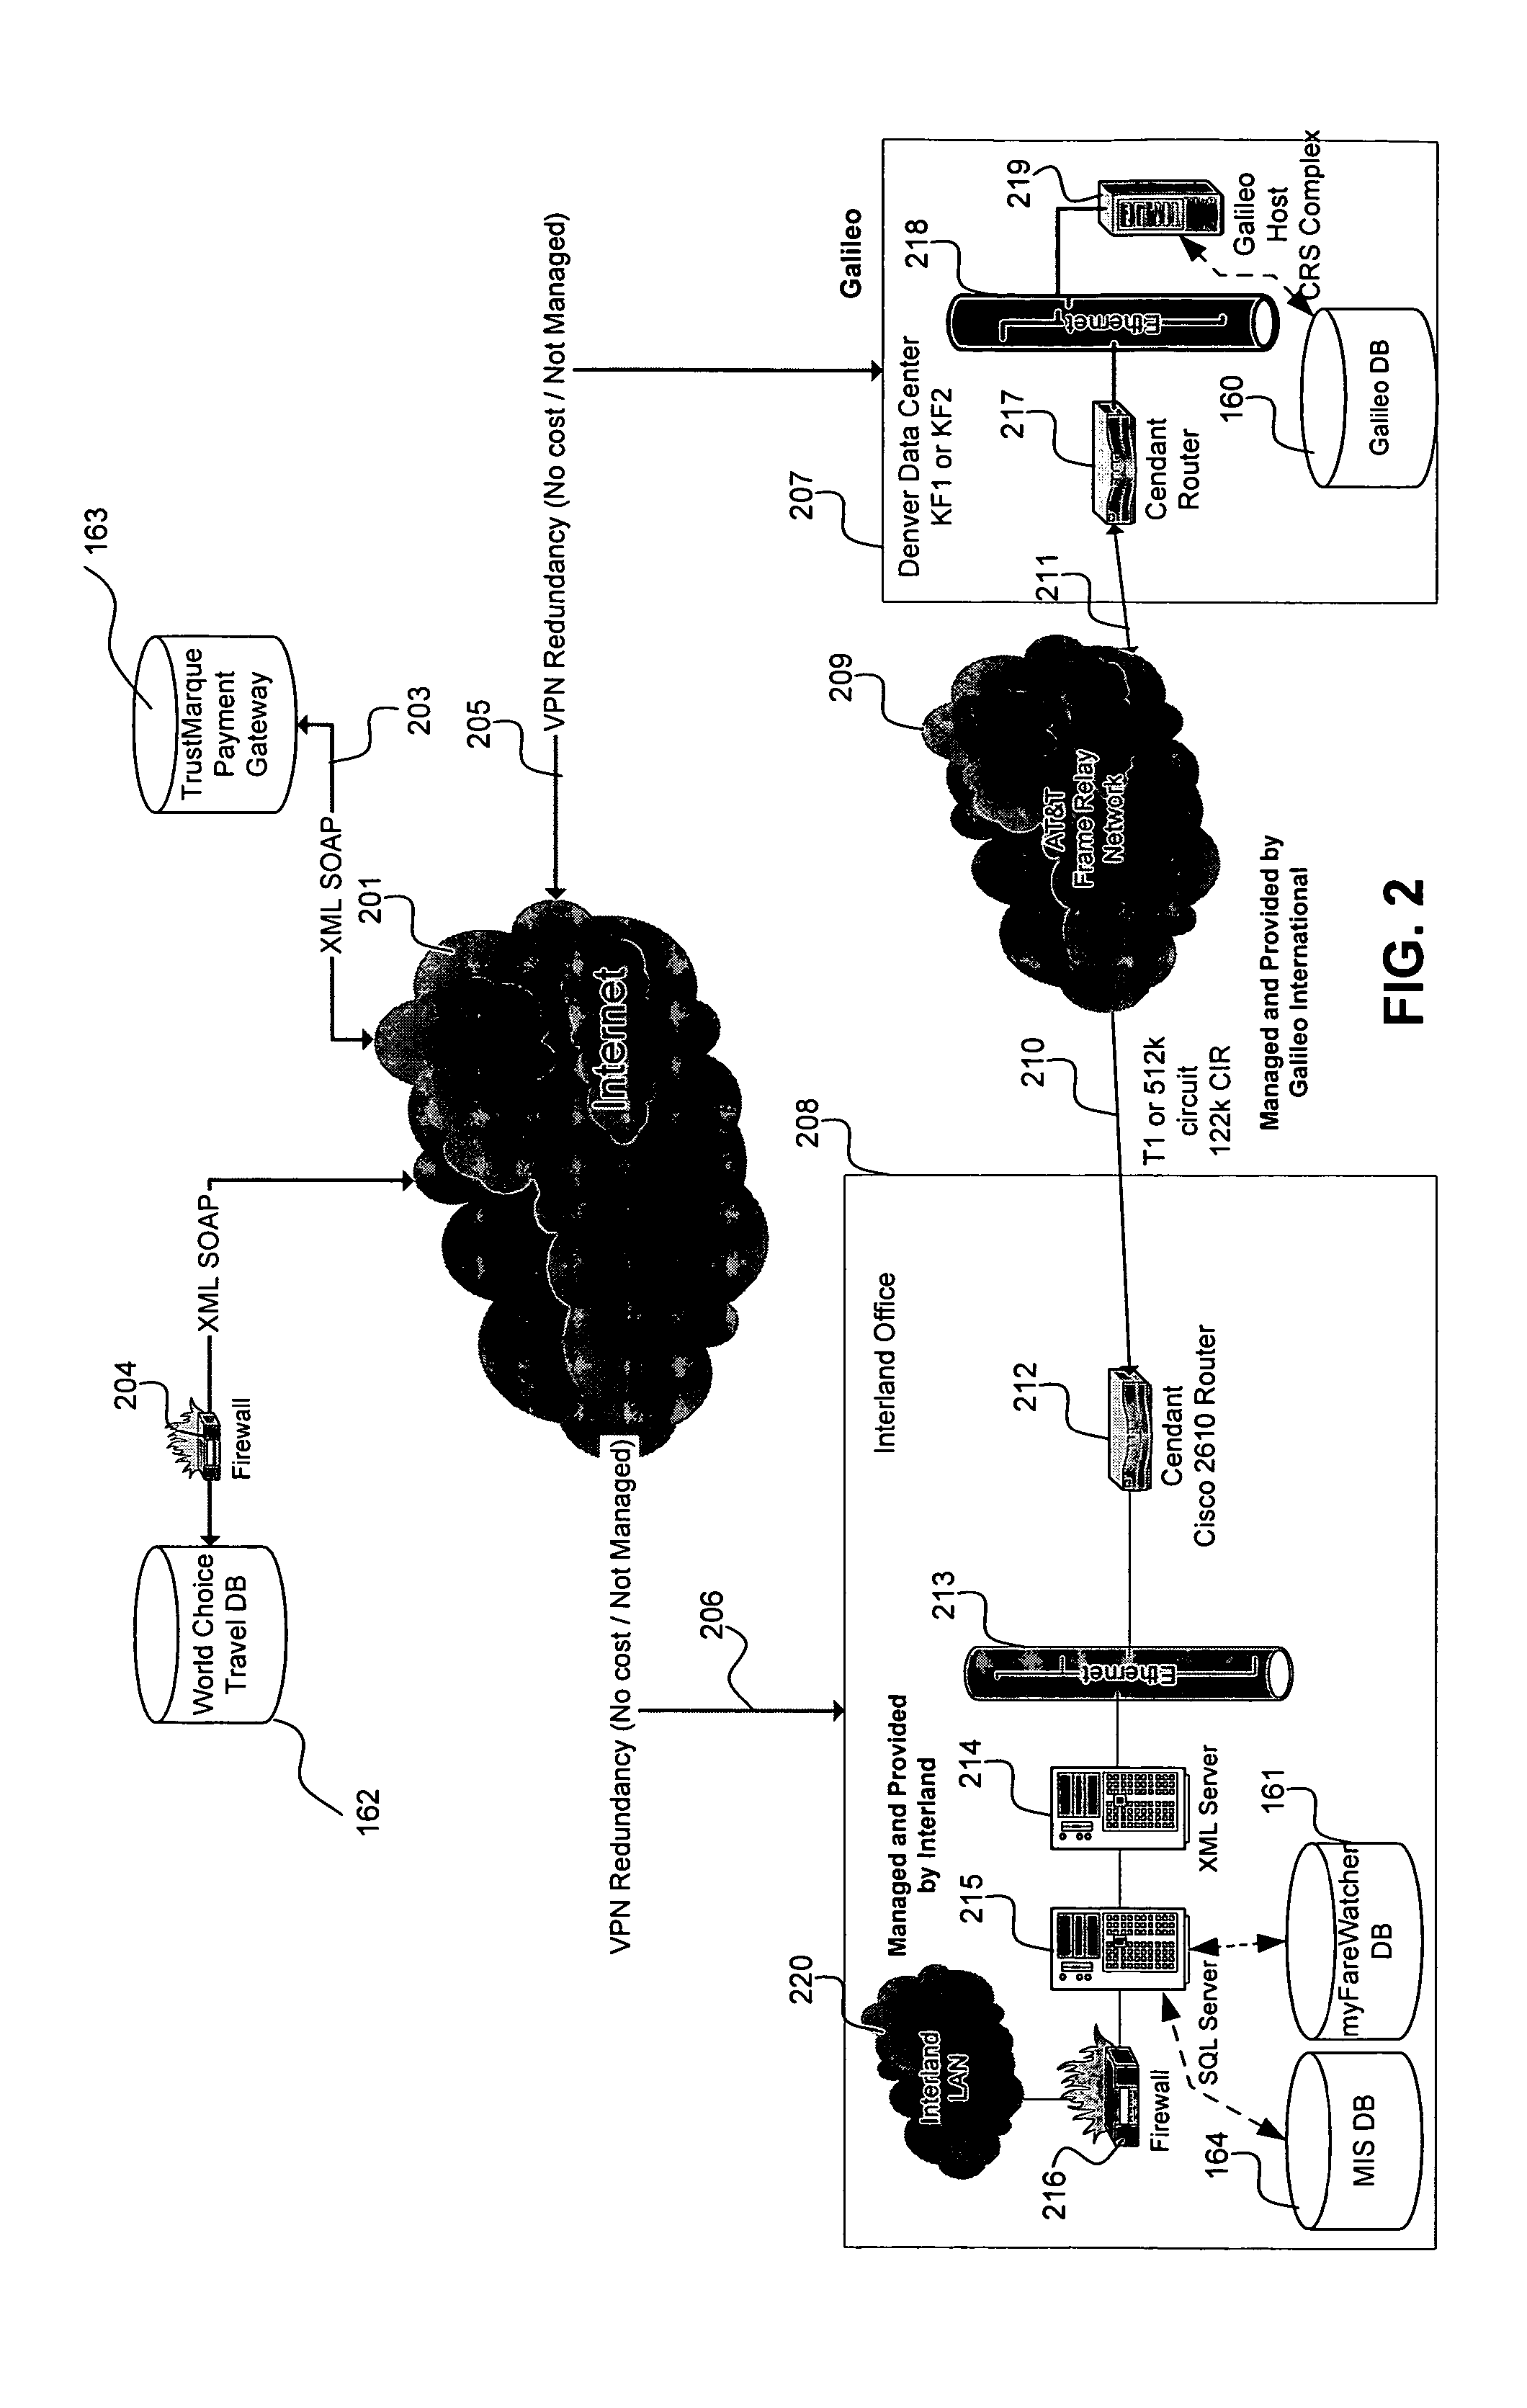 Internet based airline ticket purchasing and vacation planning system and method